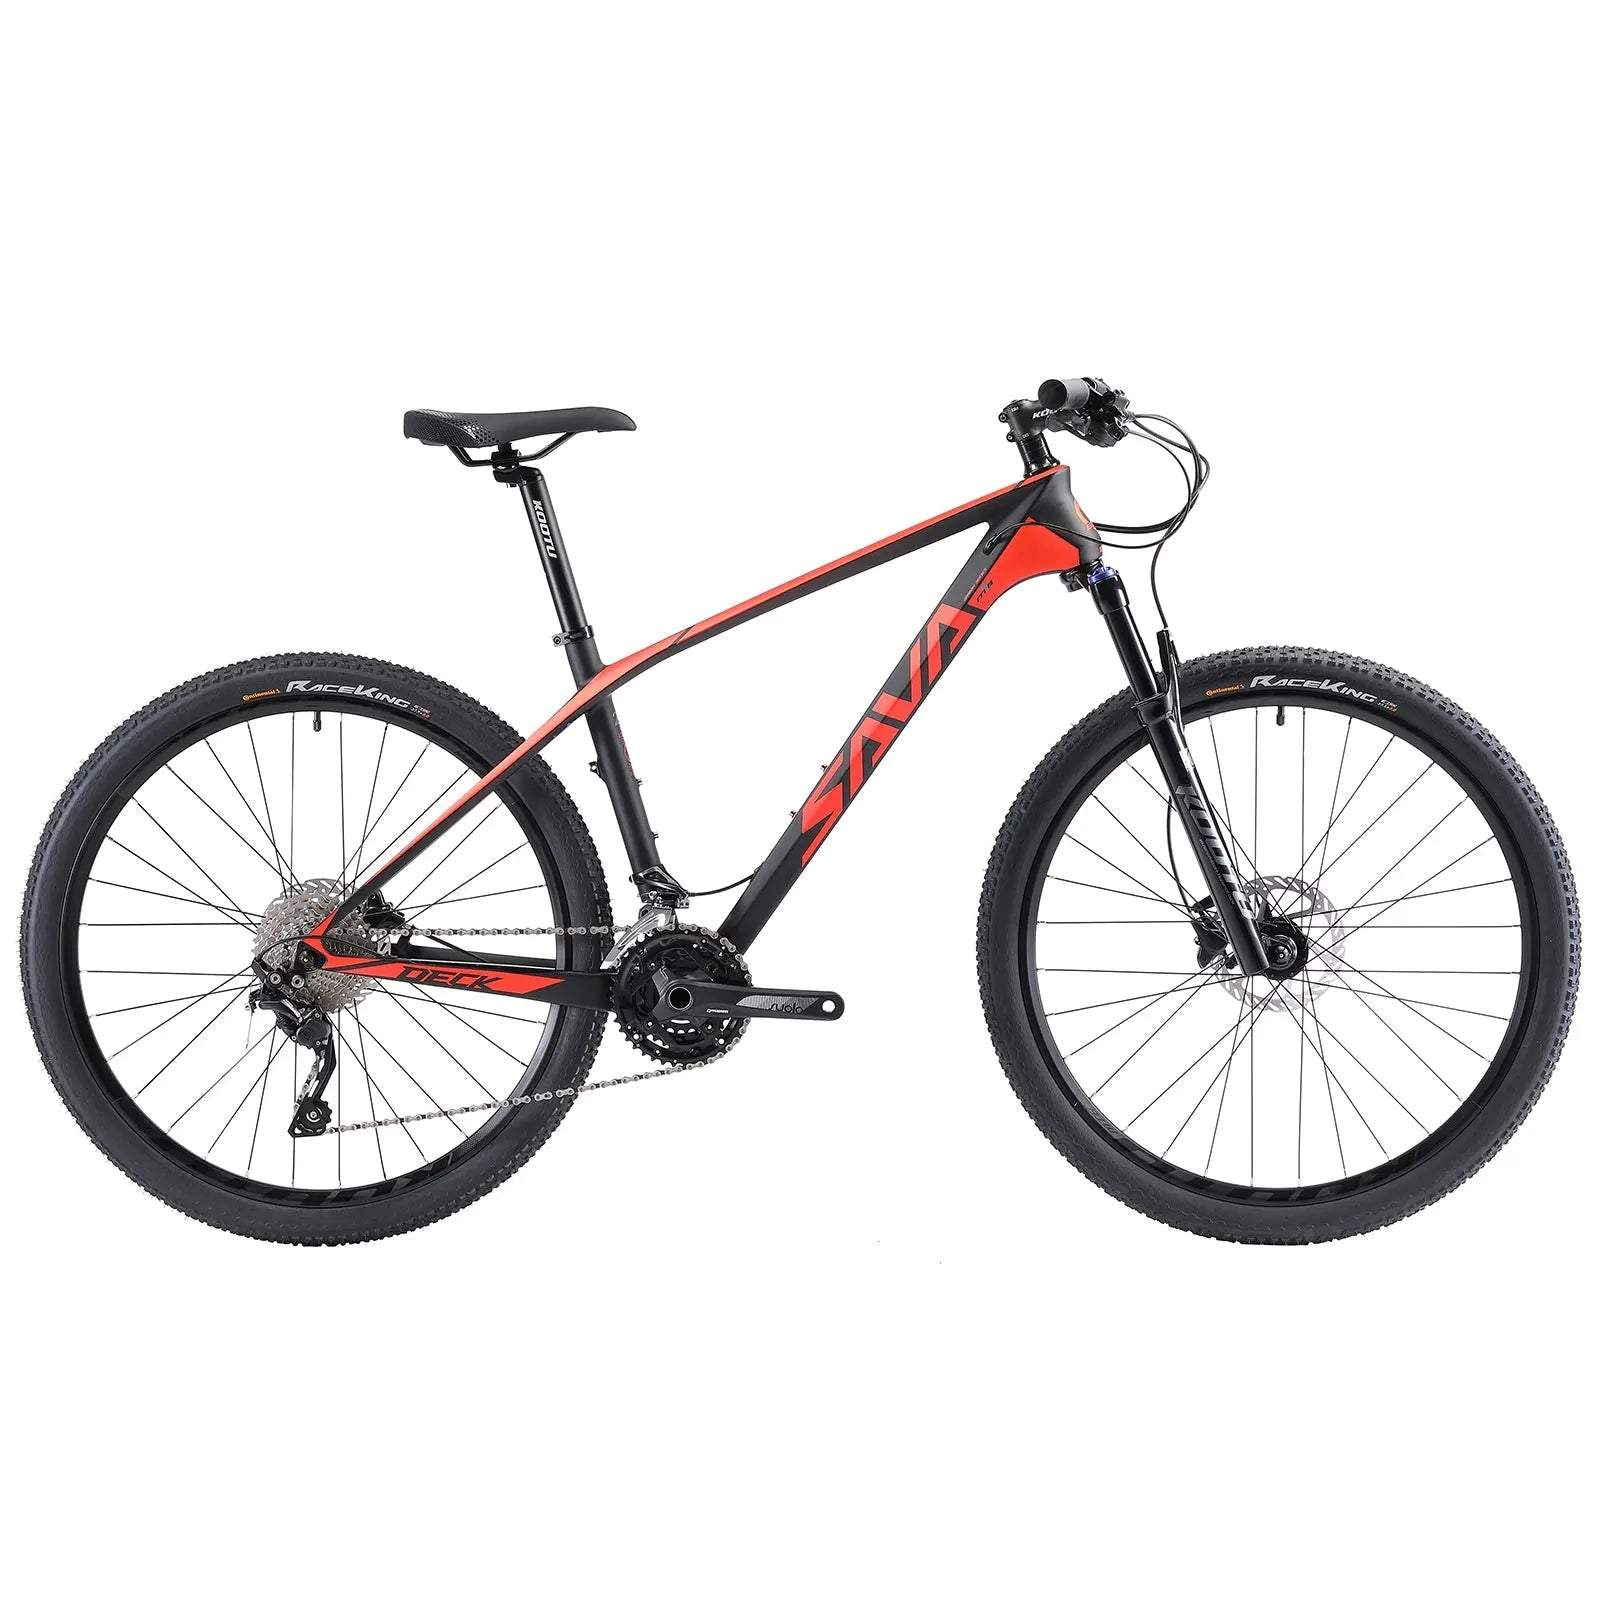 second hand mountain bikes for sale